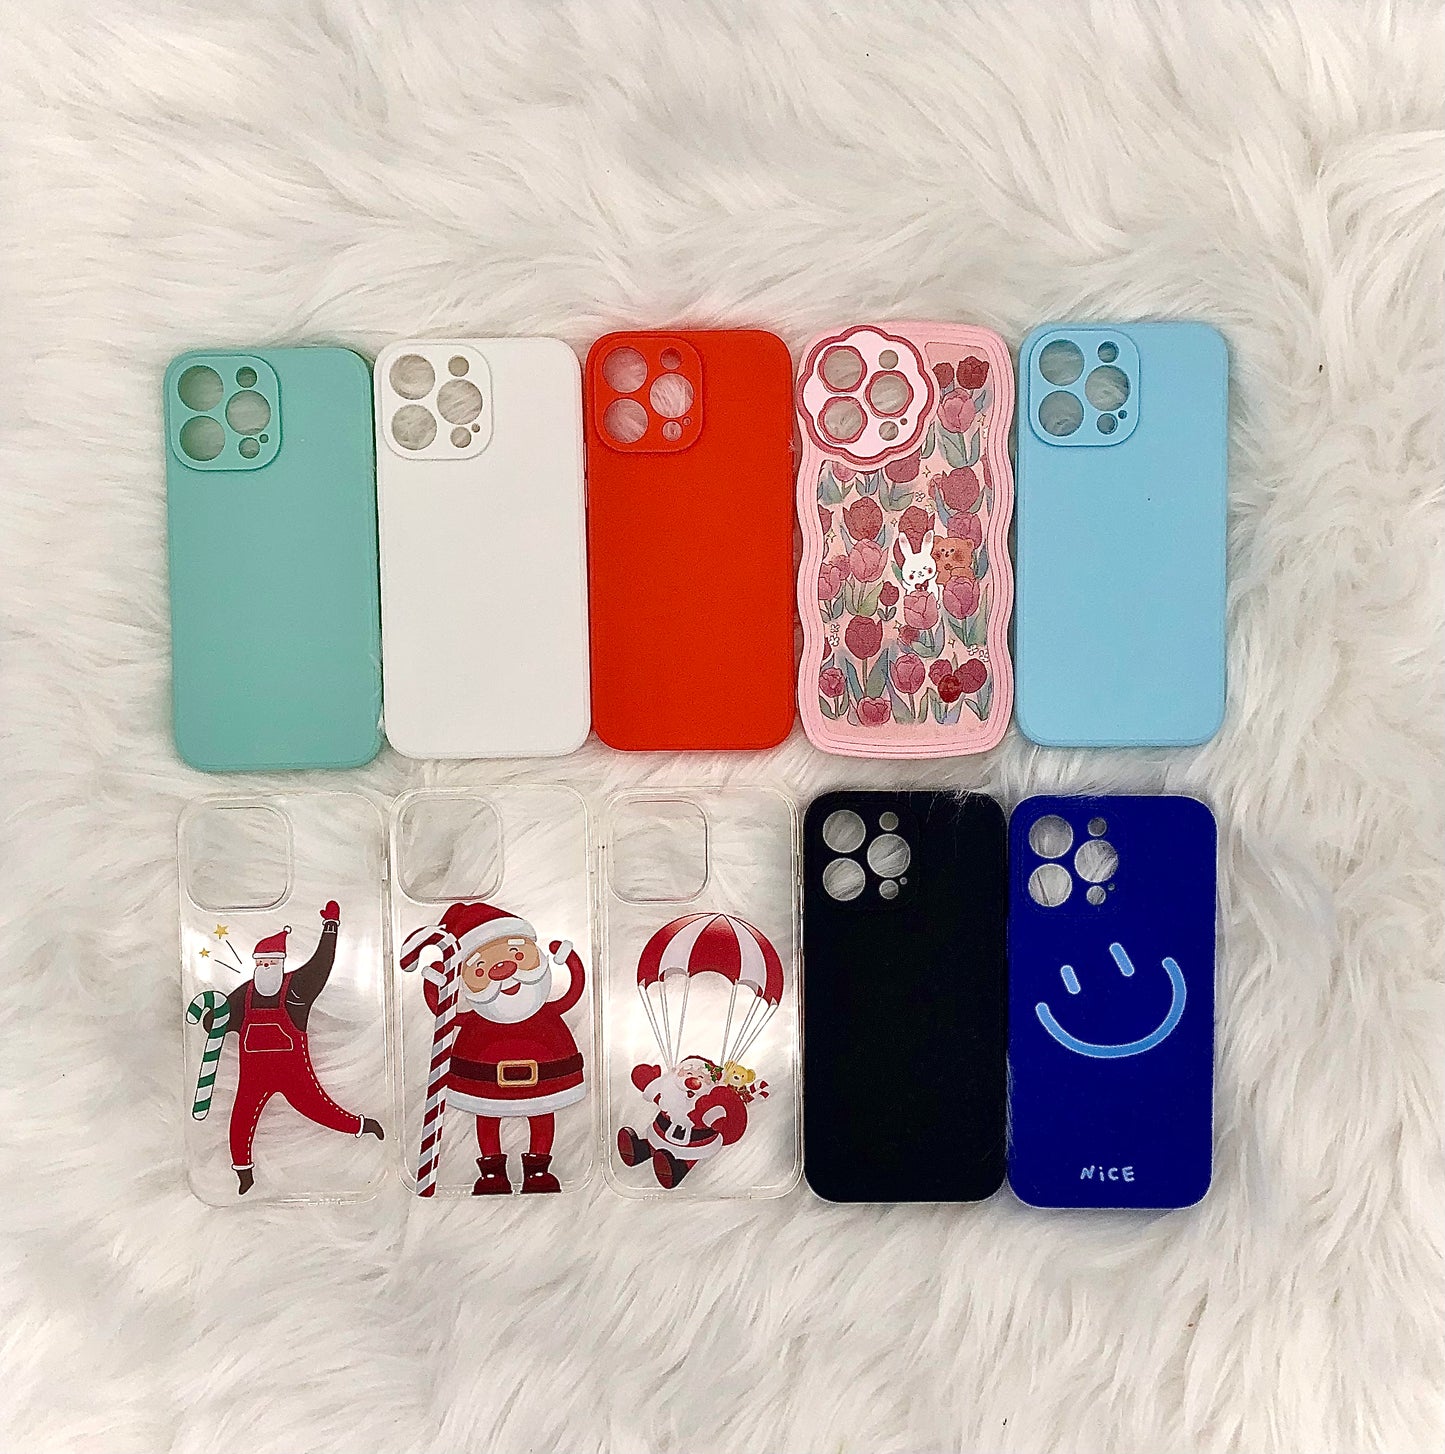 10pcs Random case for iPhone/Samsung! Free Shipping.